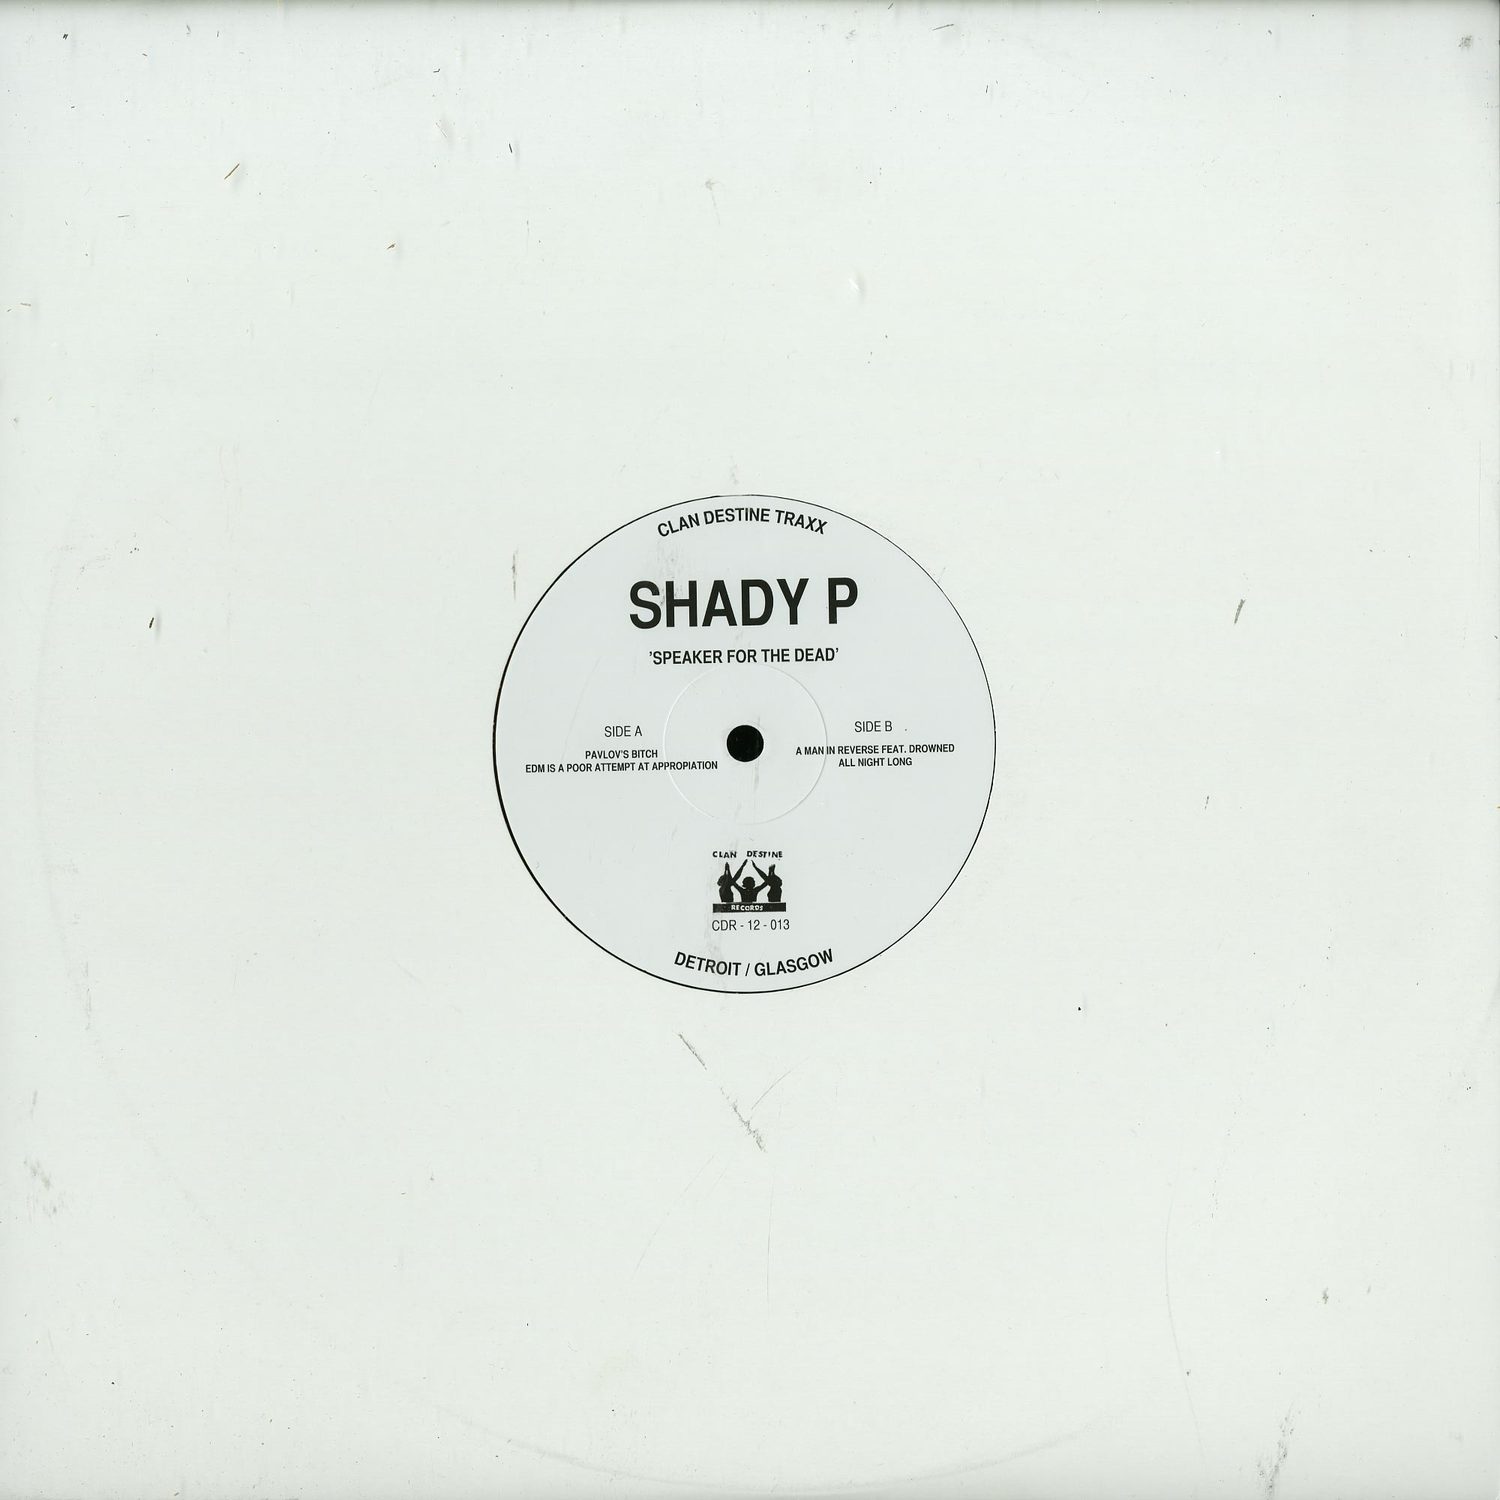 Shady P - SPEAKER FOR THE DEAD